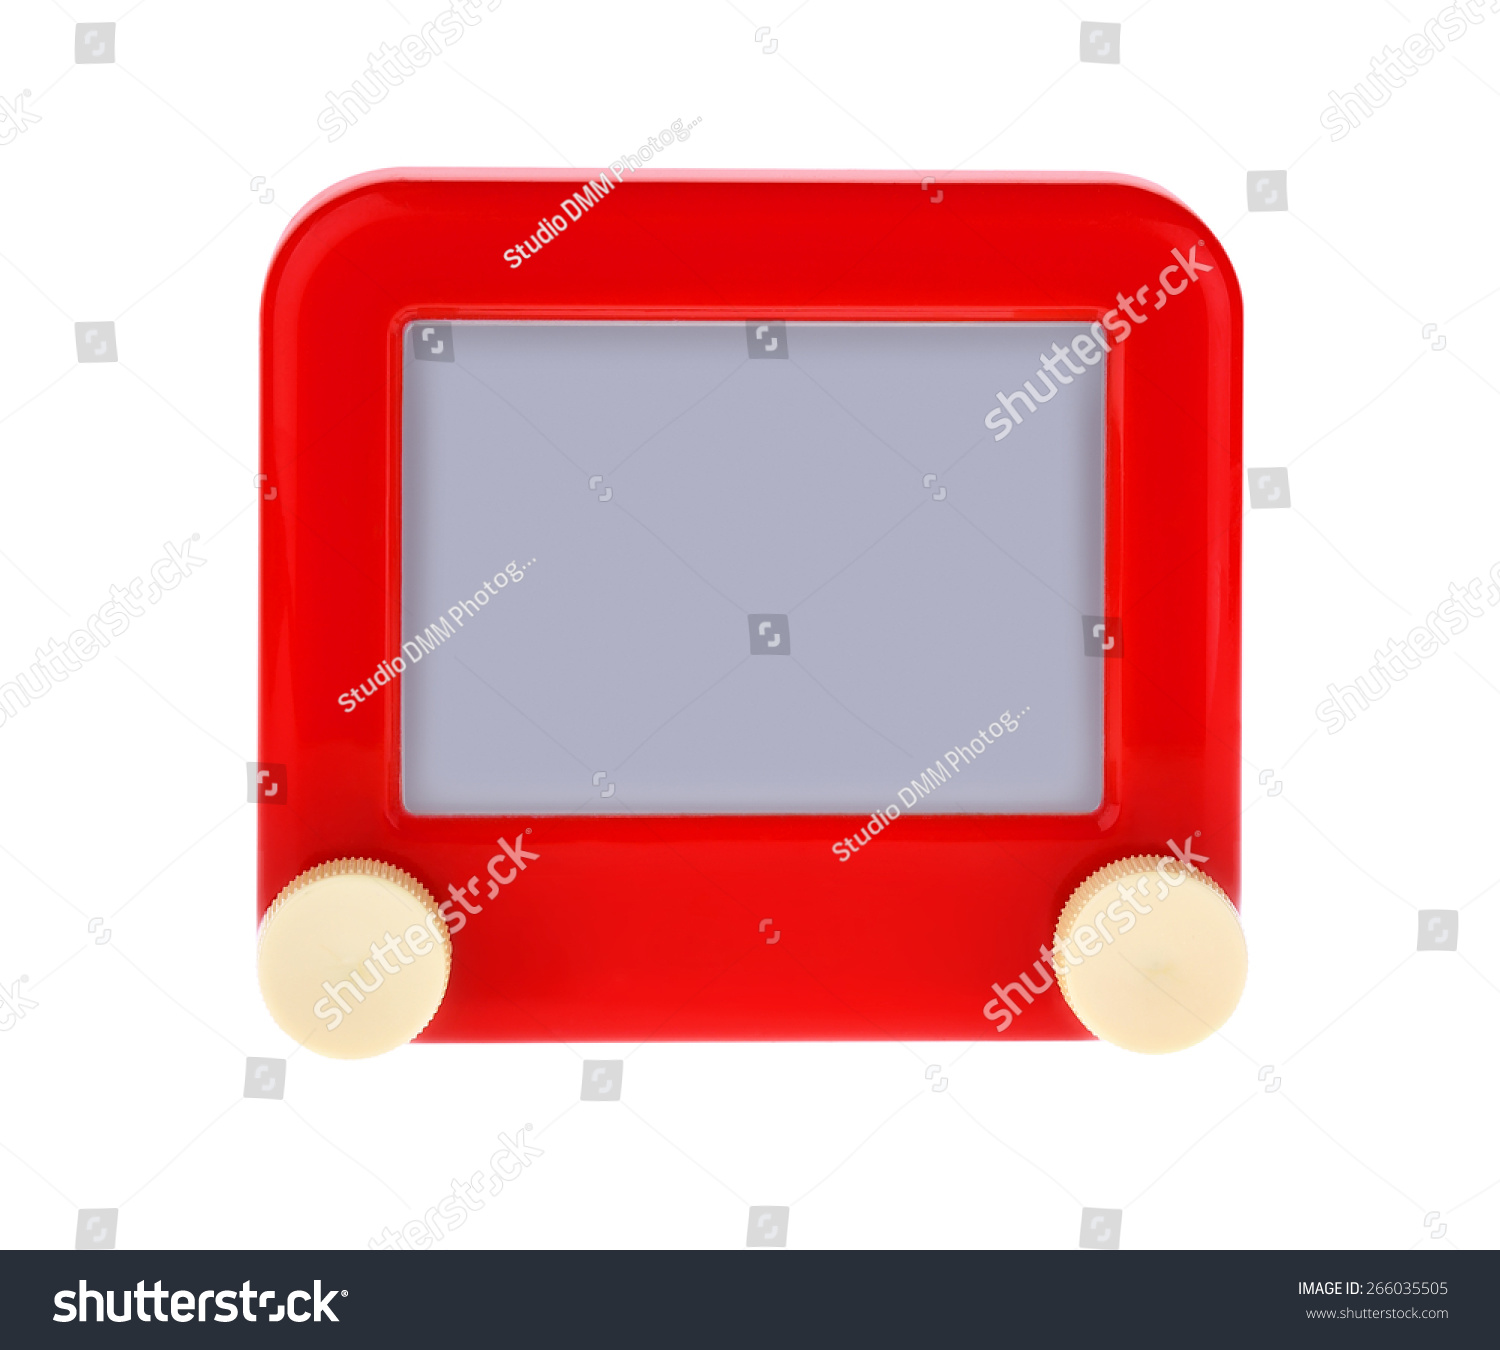 Etch A Message on a Red Sketch Board Isolated on White. #266035505